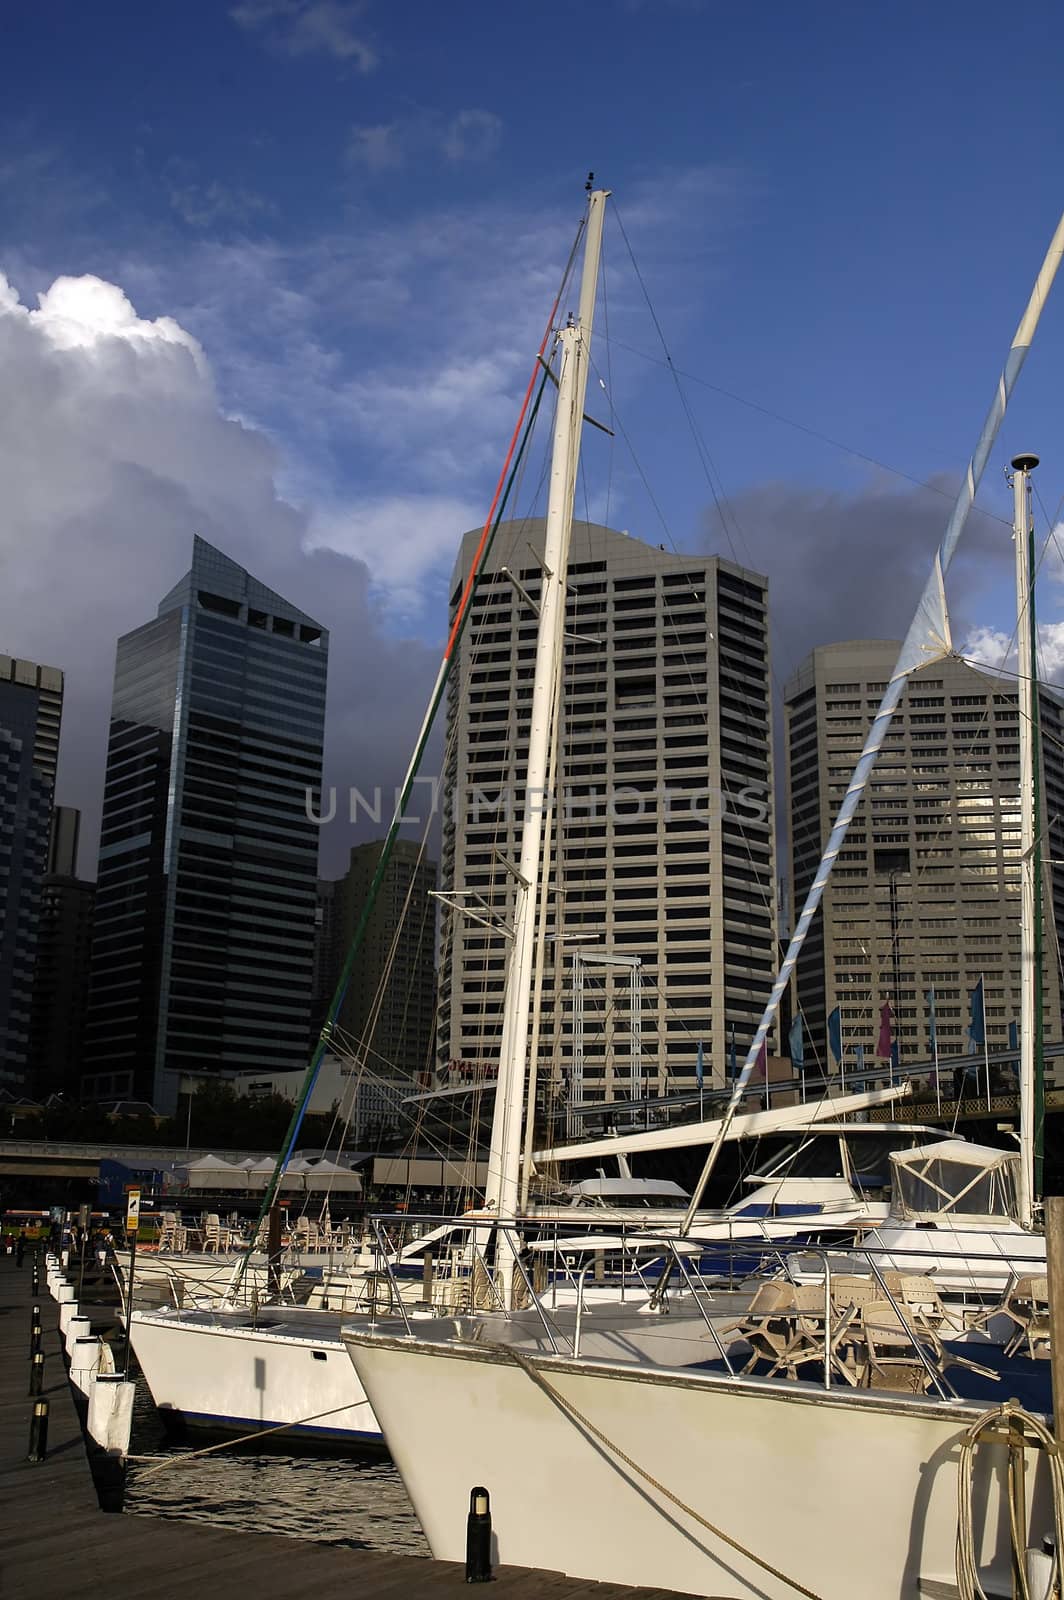 white yachts anchoring in city harbour, skyscrapers in background